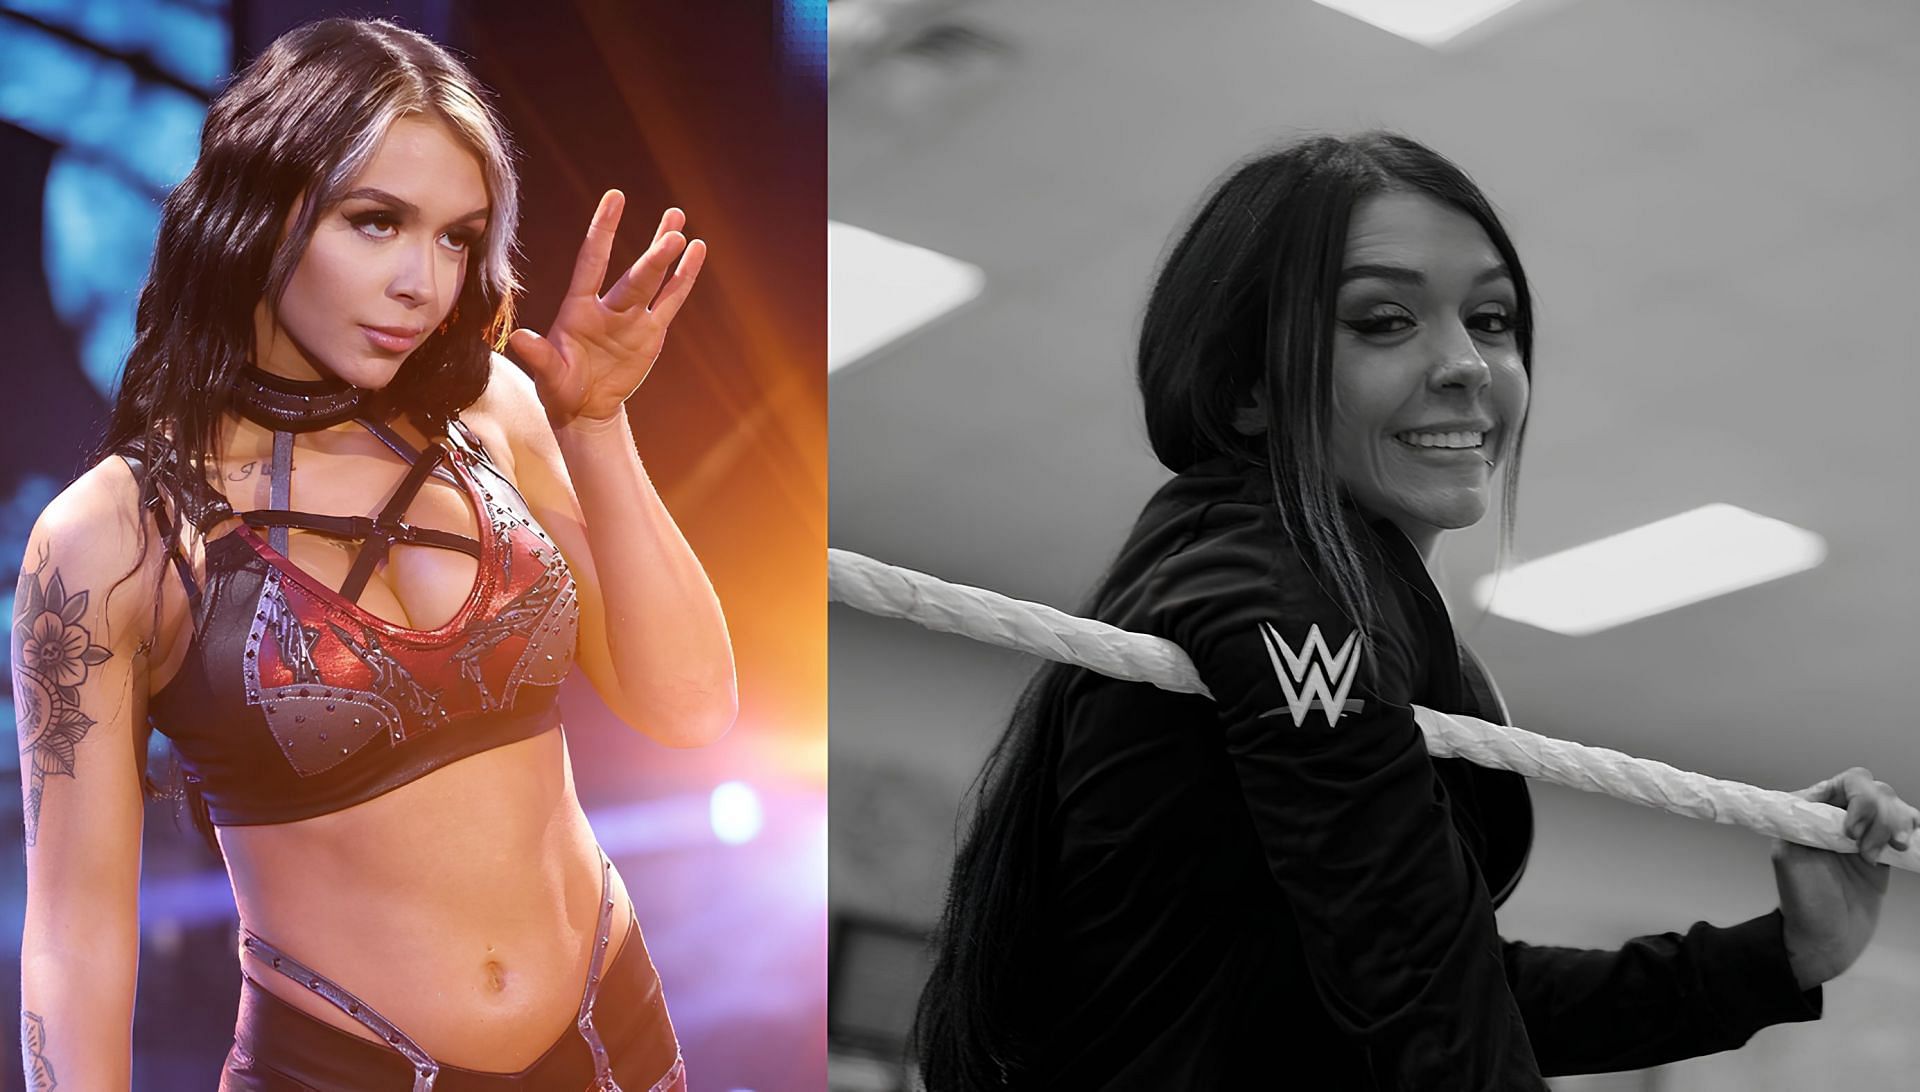 Cora Jade is currently drafted on NXT